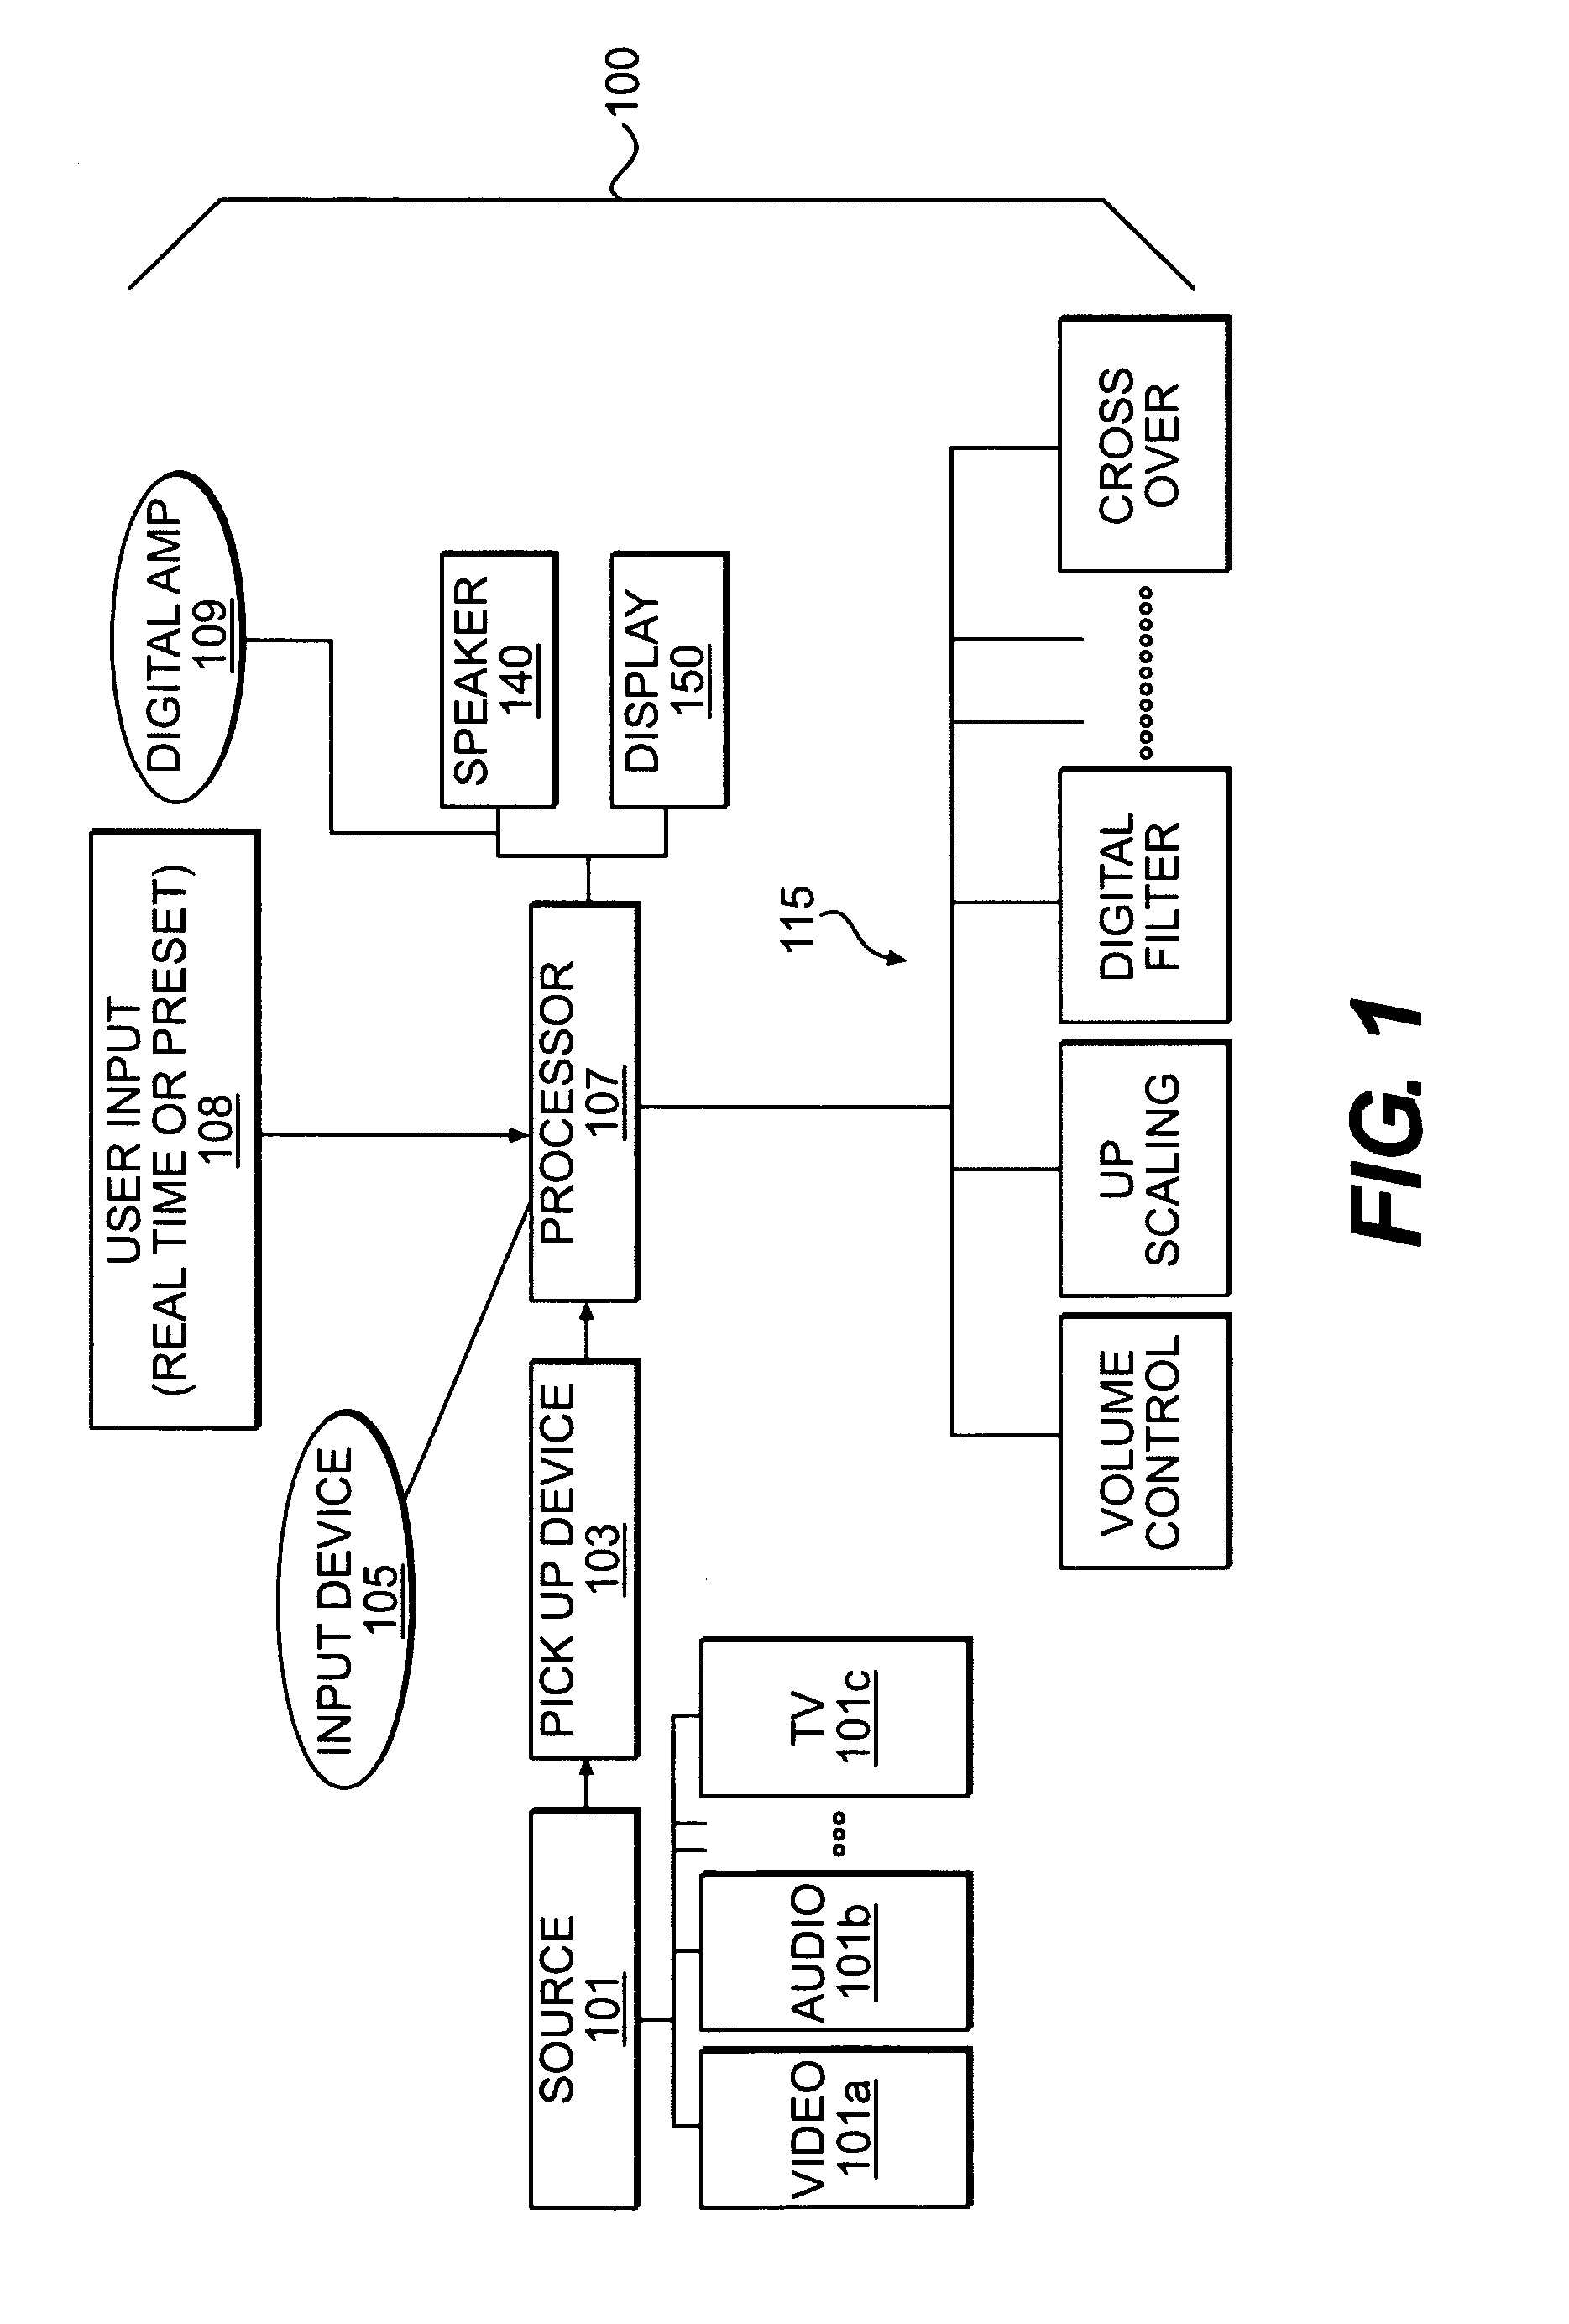 Integrated multimedia signal processing system using centralized processing of signals and other peripheral device